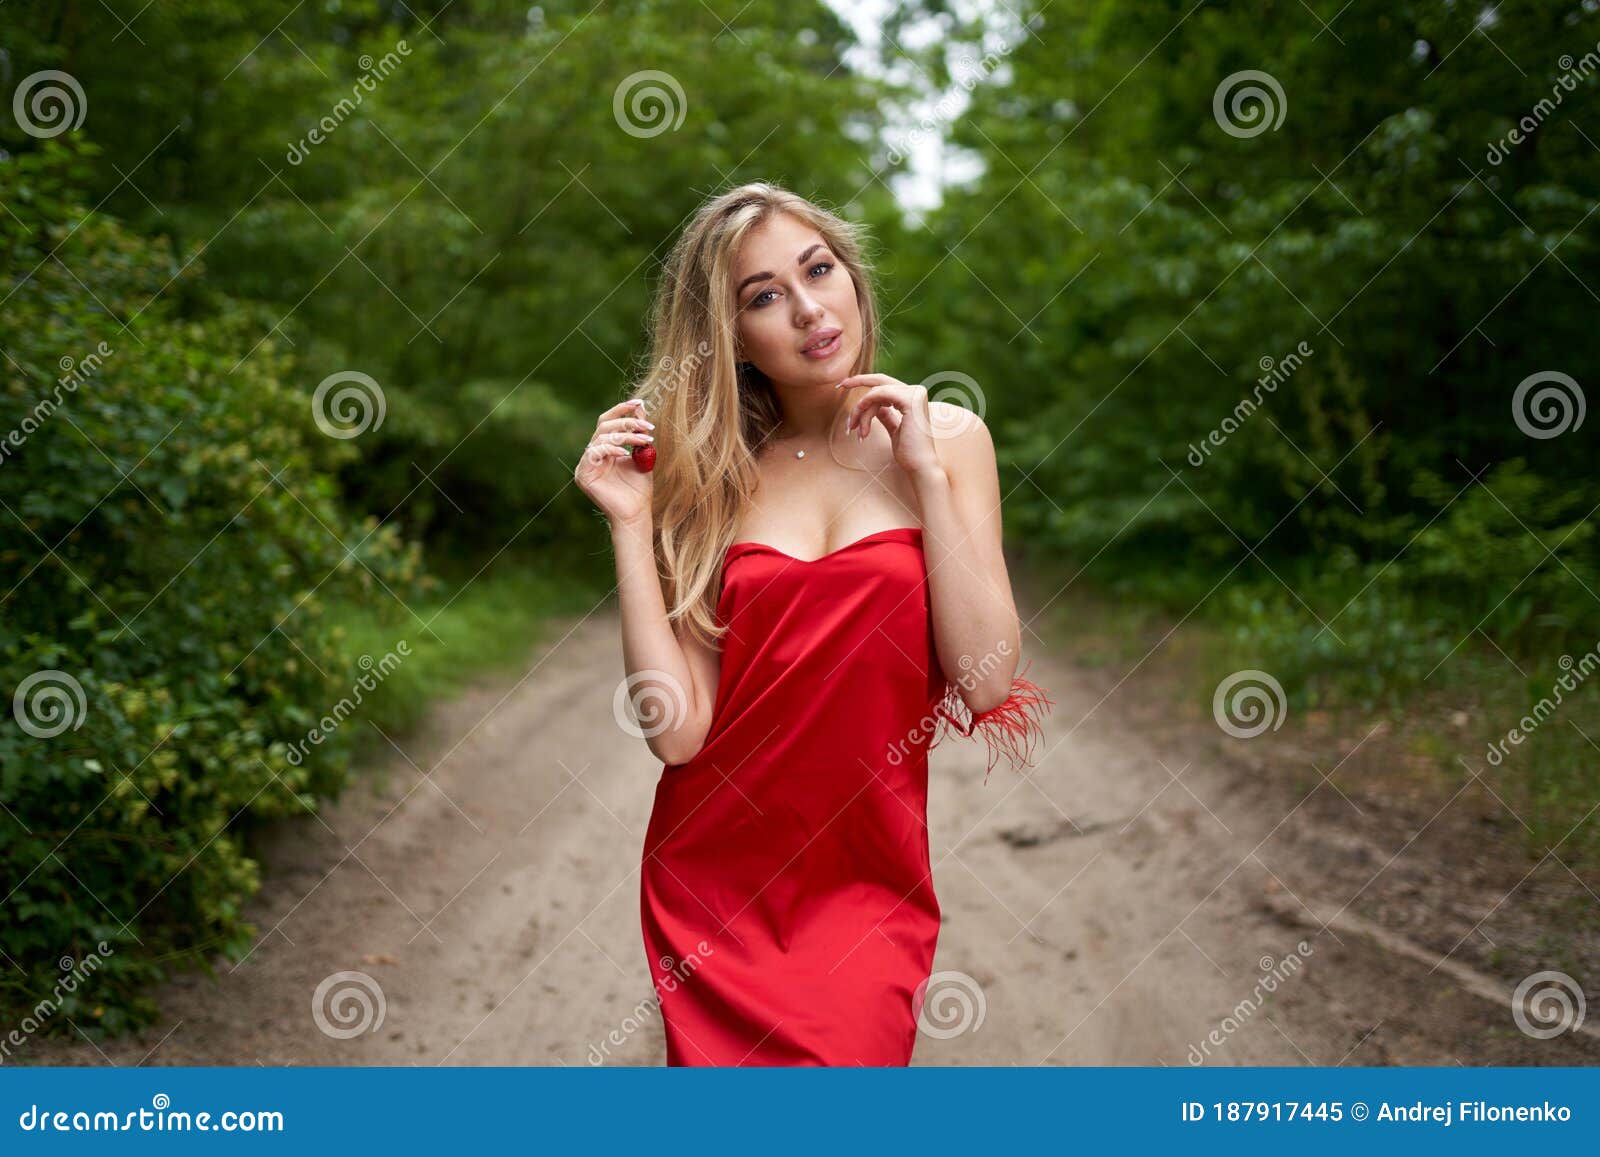 Beautiful Young Long-haired Blonde in a Red Dress Posing on the Road in ...